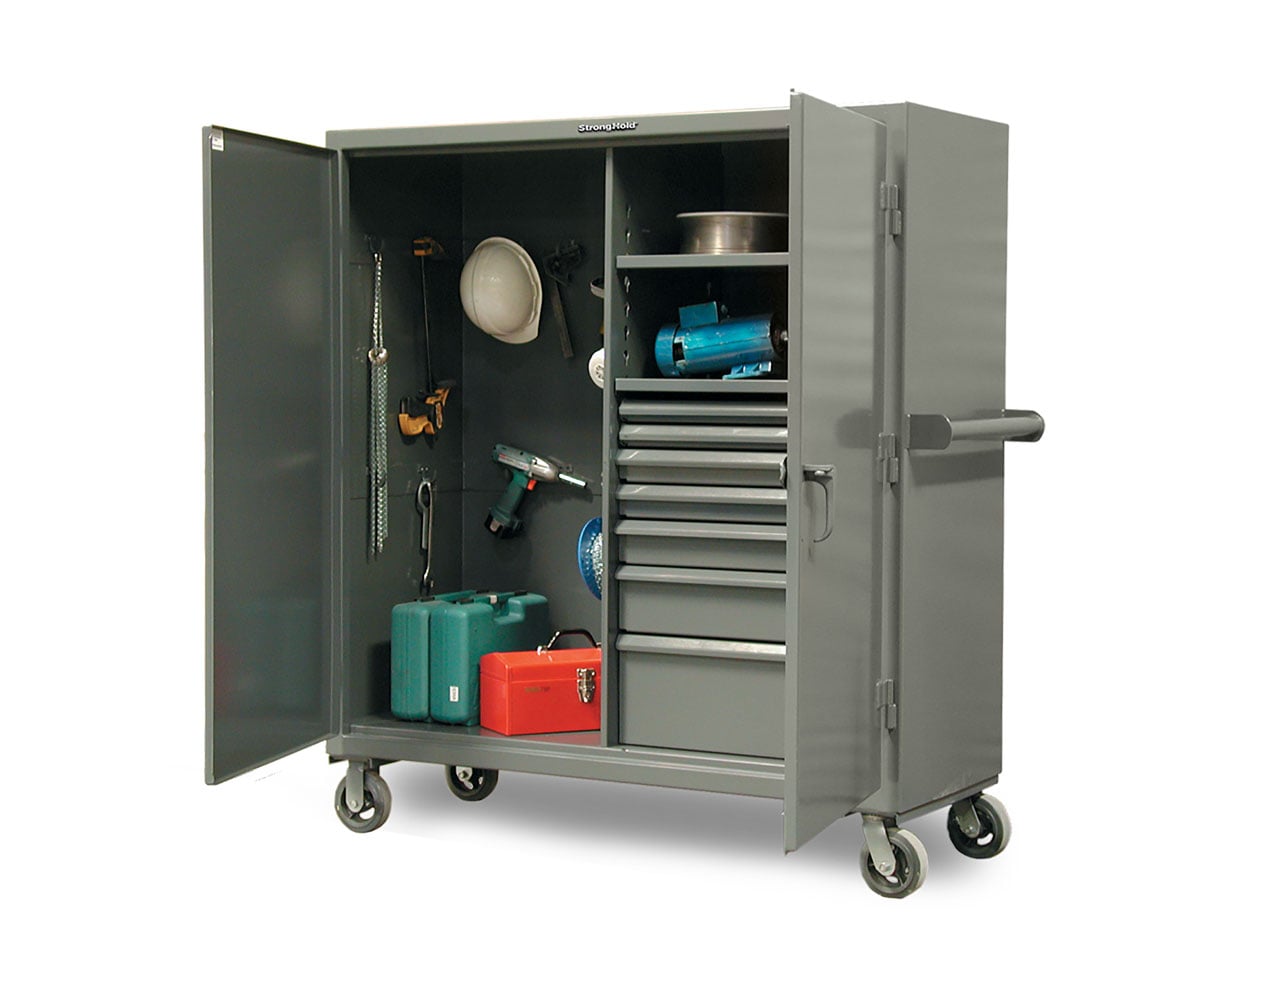 Extreme Duty 12 GA Mobile Rigging Cabinet with 7 Half-Width Drawers, 2 Shelves - 48 in. W x 24 in. D x 68 in. H